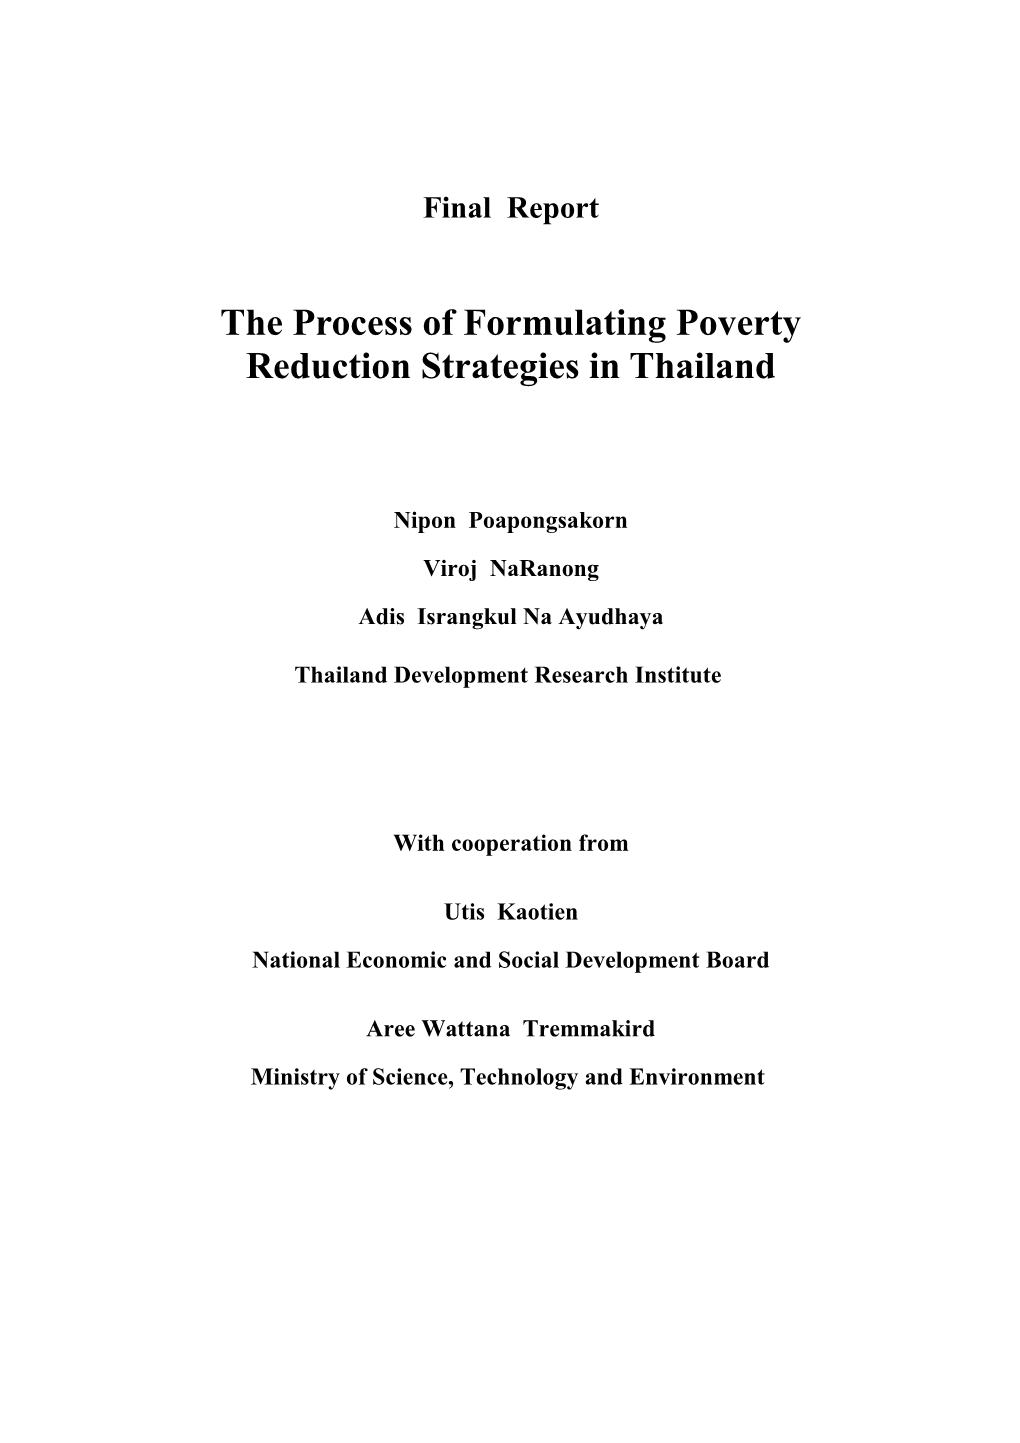 The Process of Formulating Poverty Reduction Strategies in Thailand